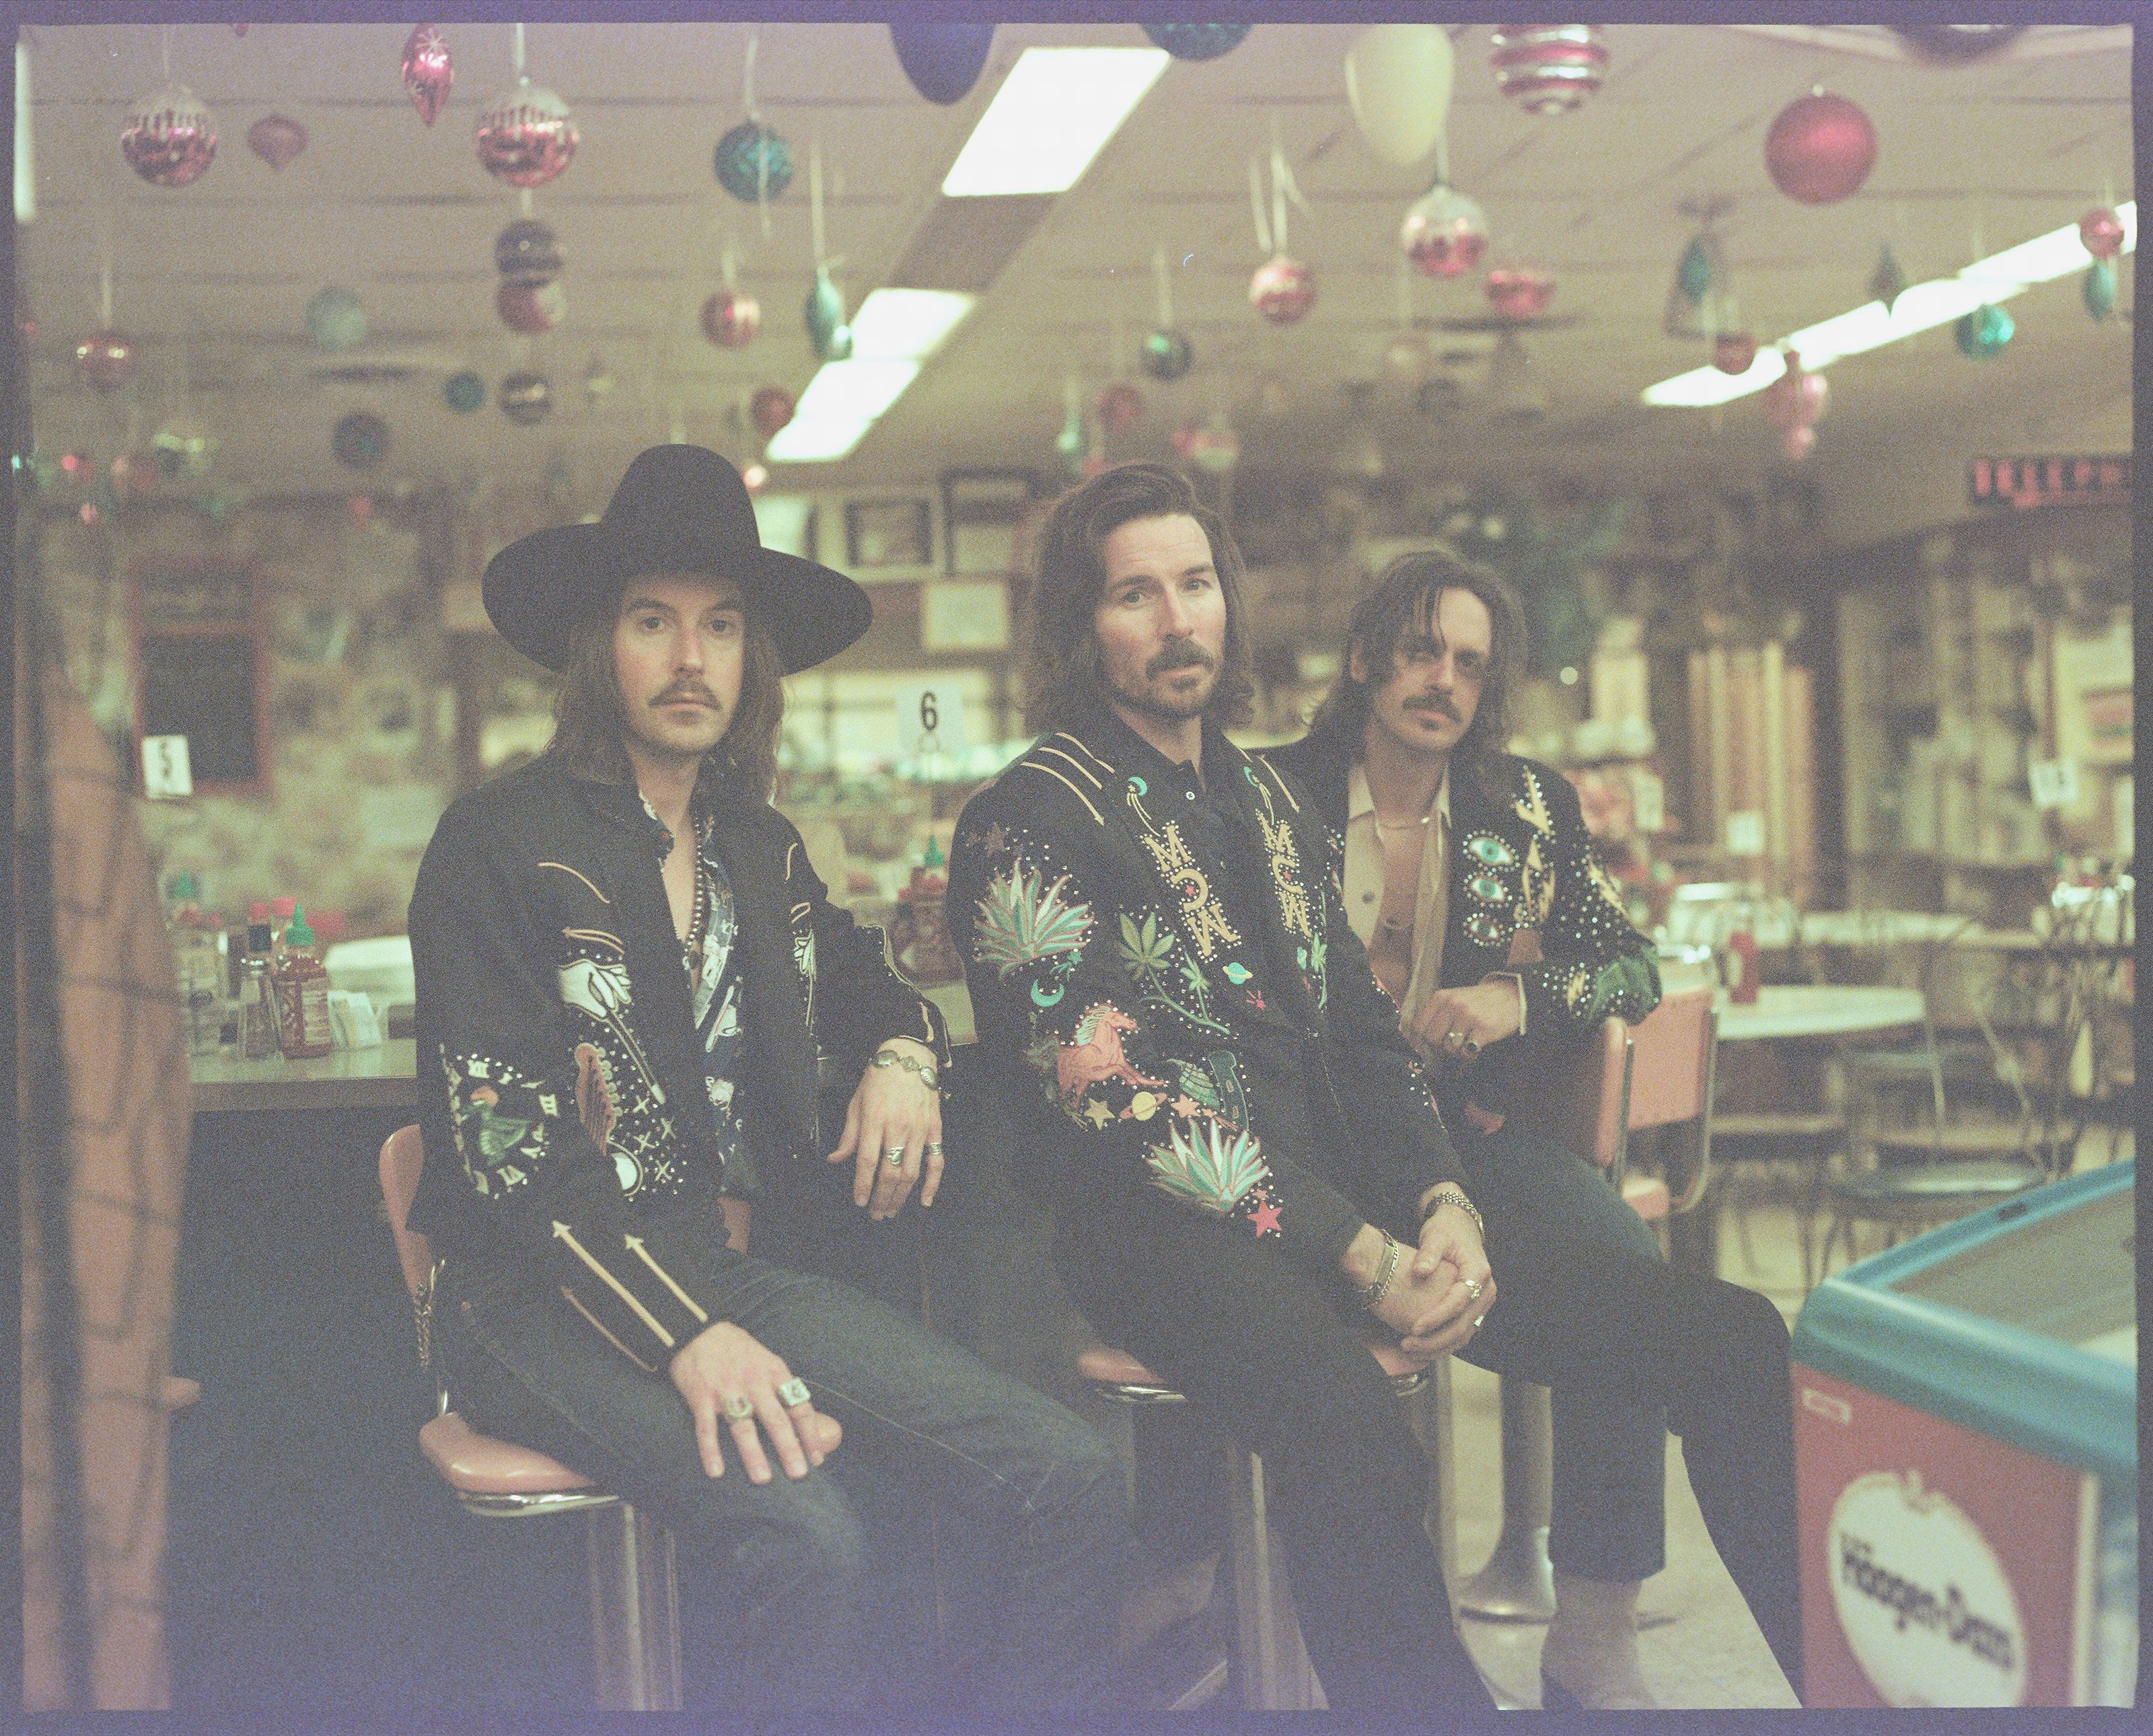 Midland Says New Album From 'Feels Like an Evolution of Sorts